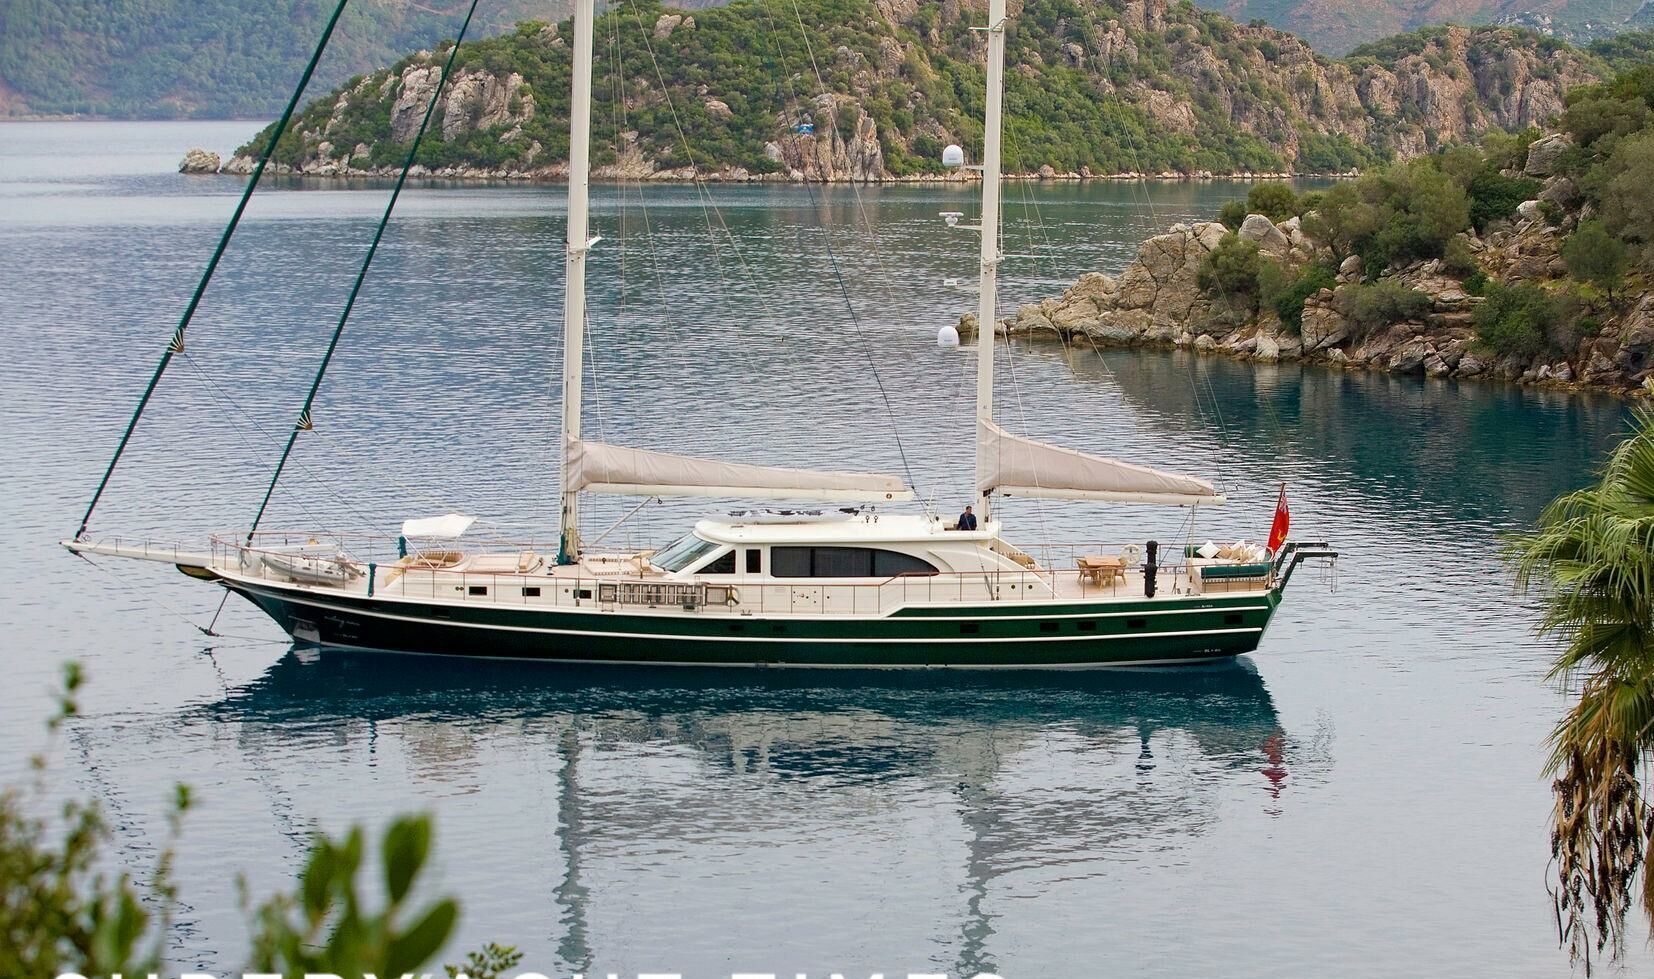 S/Y SAILING NOUR: A Luxurious 37-Meter Gulet Sailing Yacht Listed for Sale